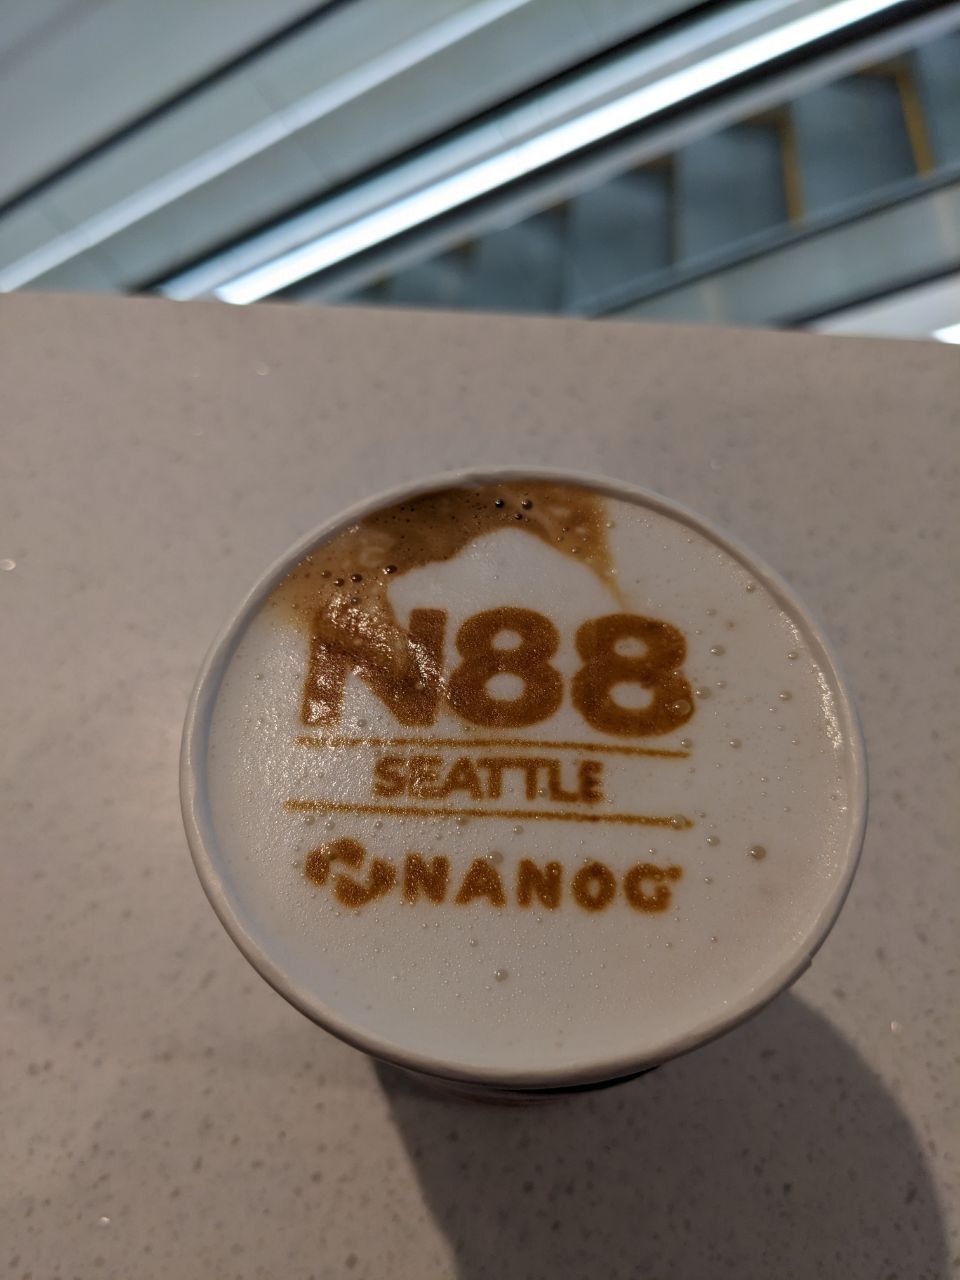 A cup of coffee with latte art saying "N88 - Seattle - NANOG"